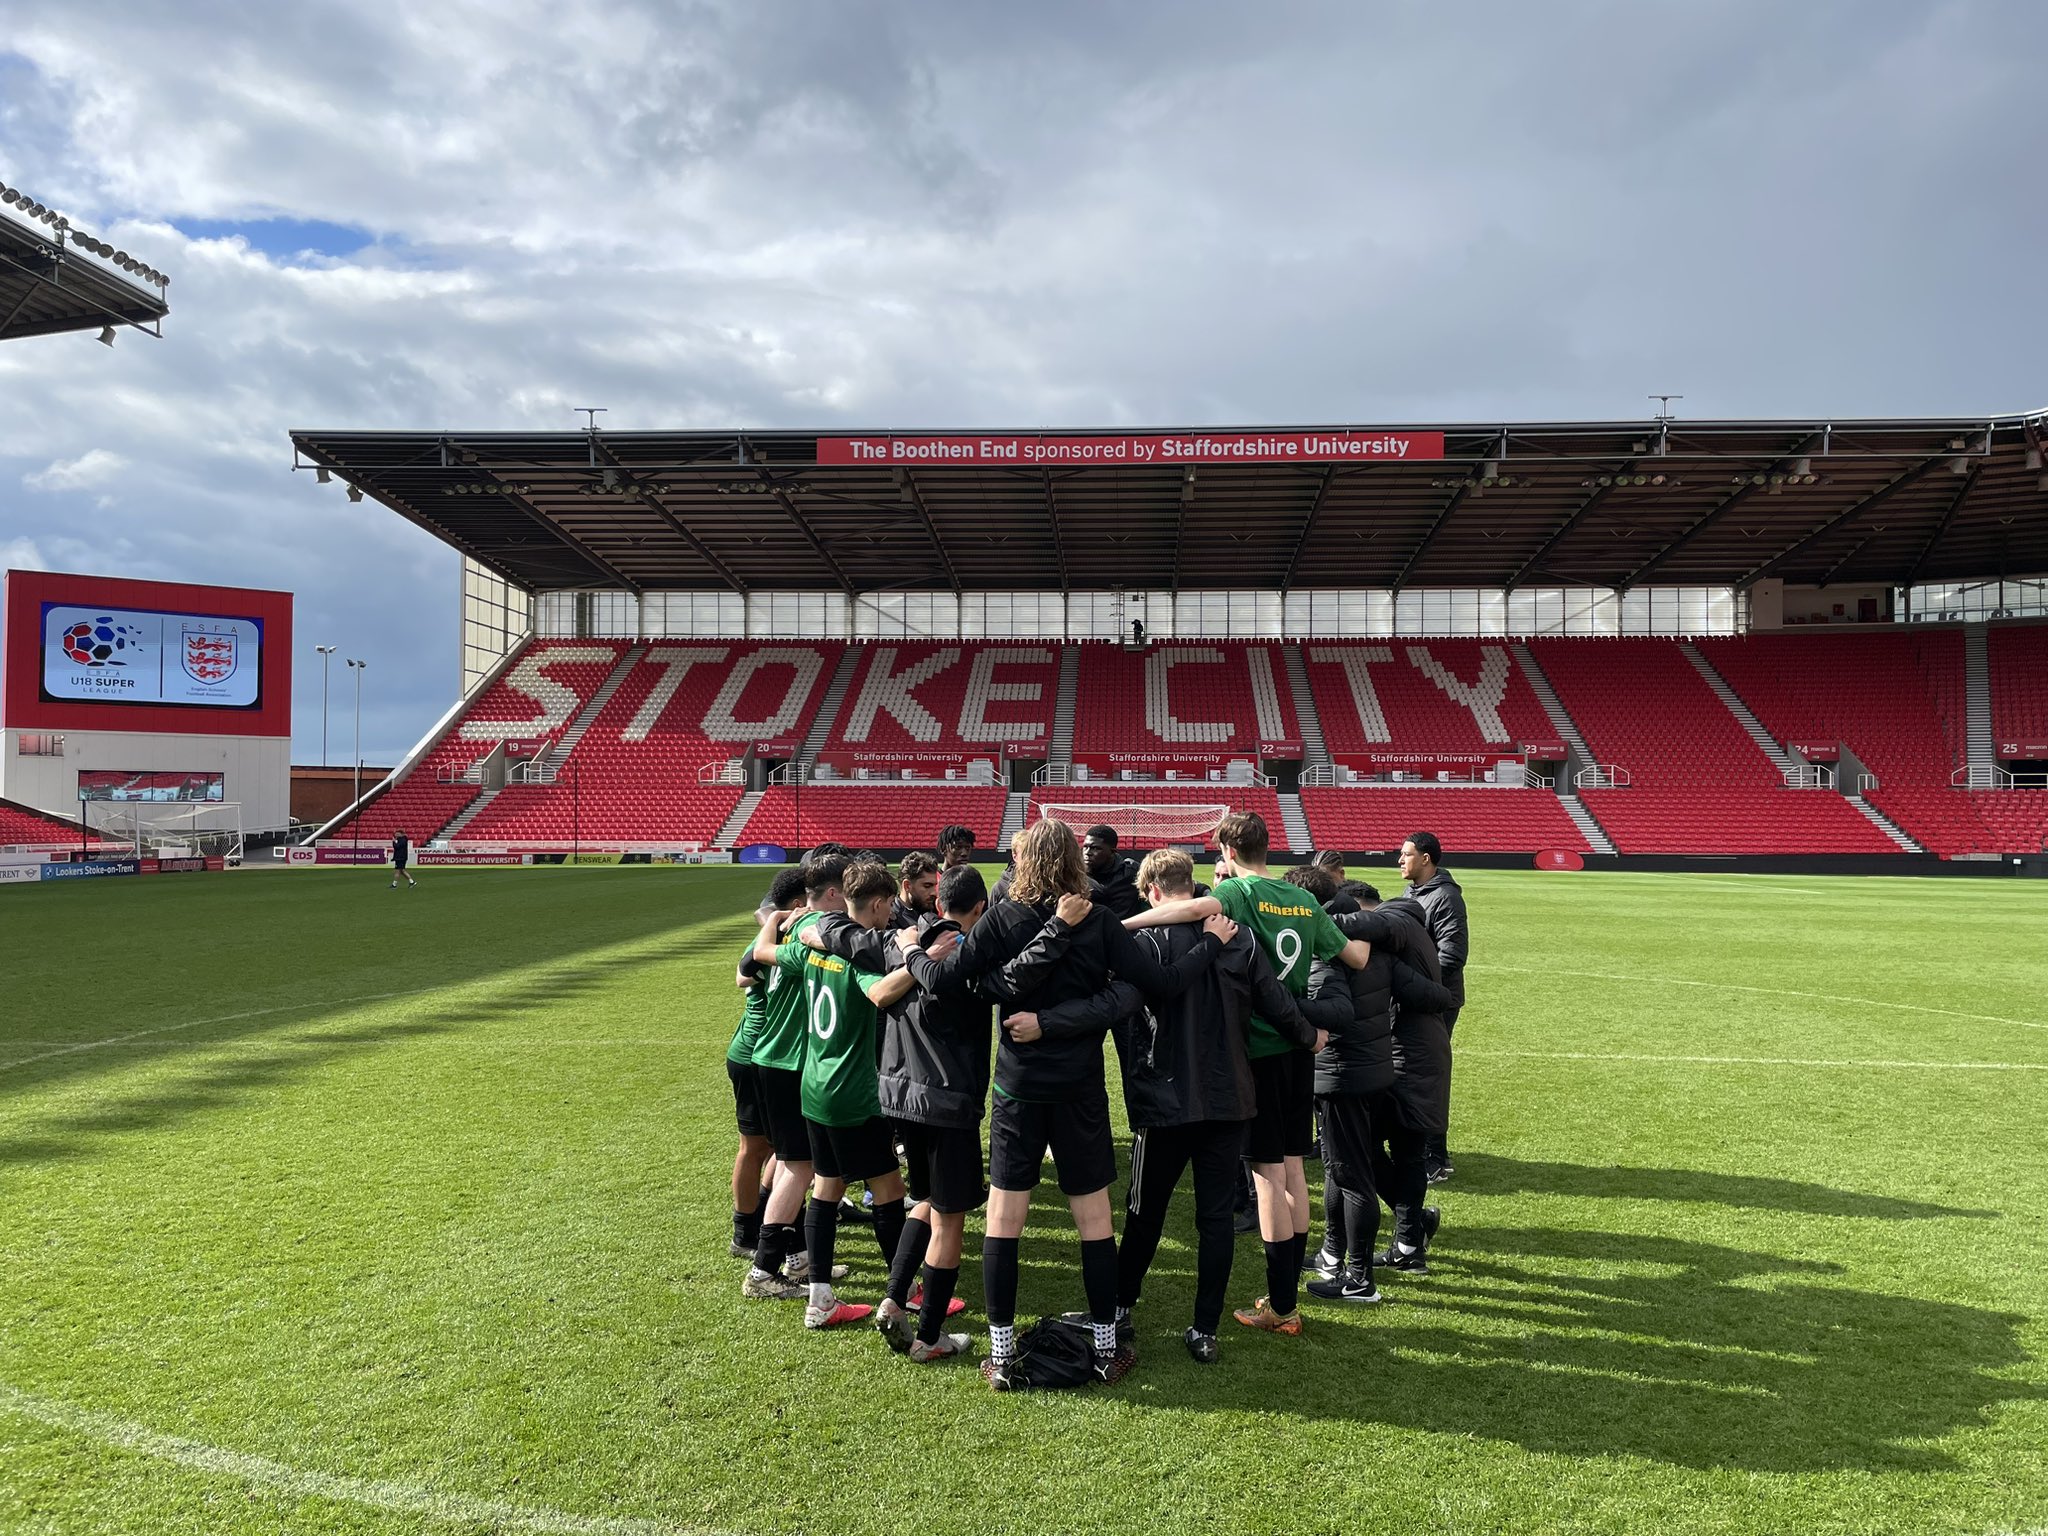 Kinetic HCACP play in National Cup Final at Stoke City FC